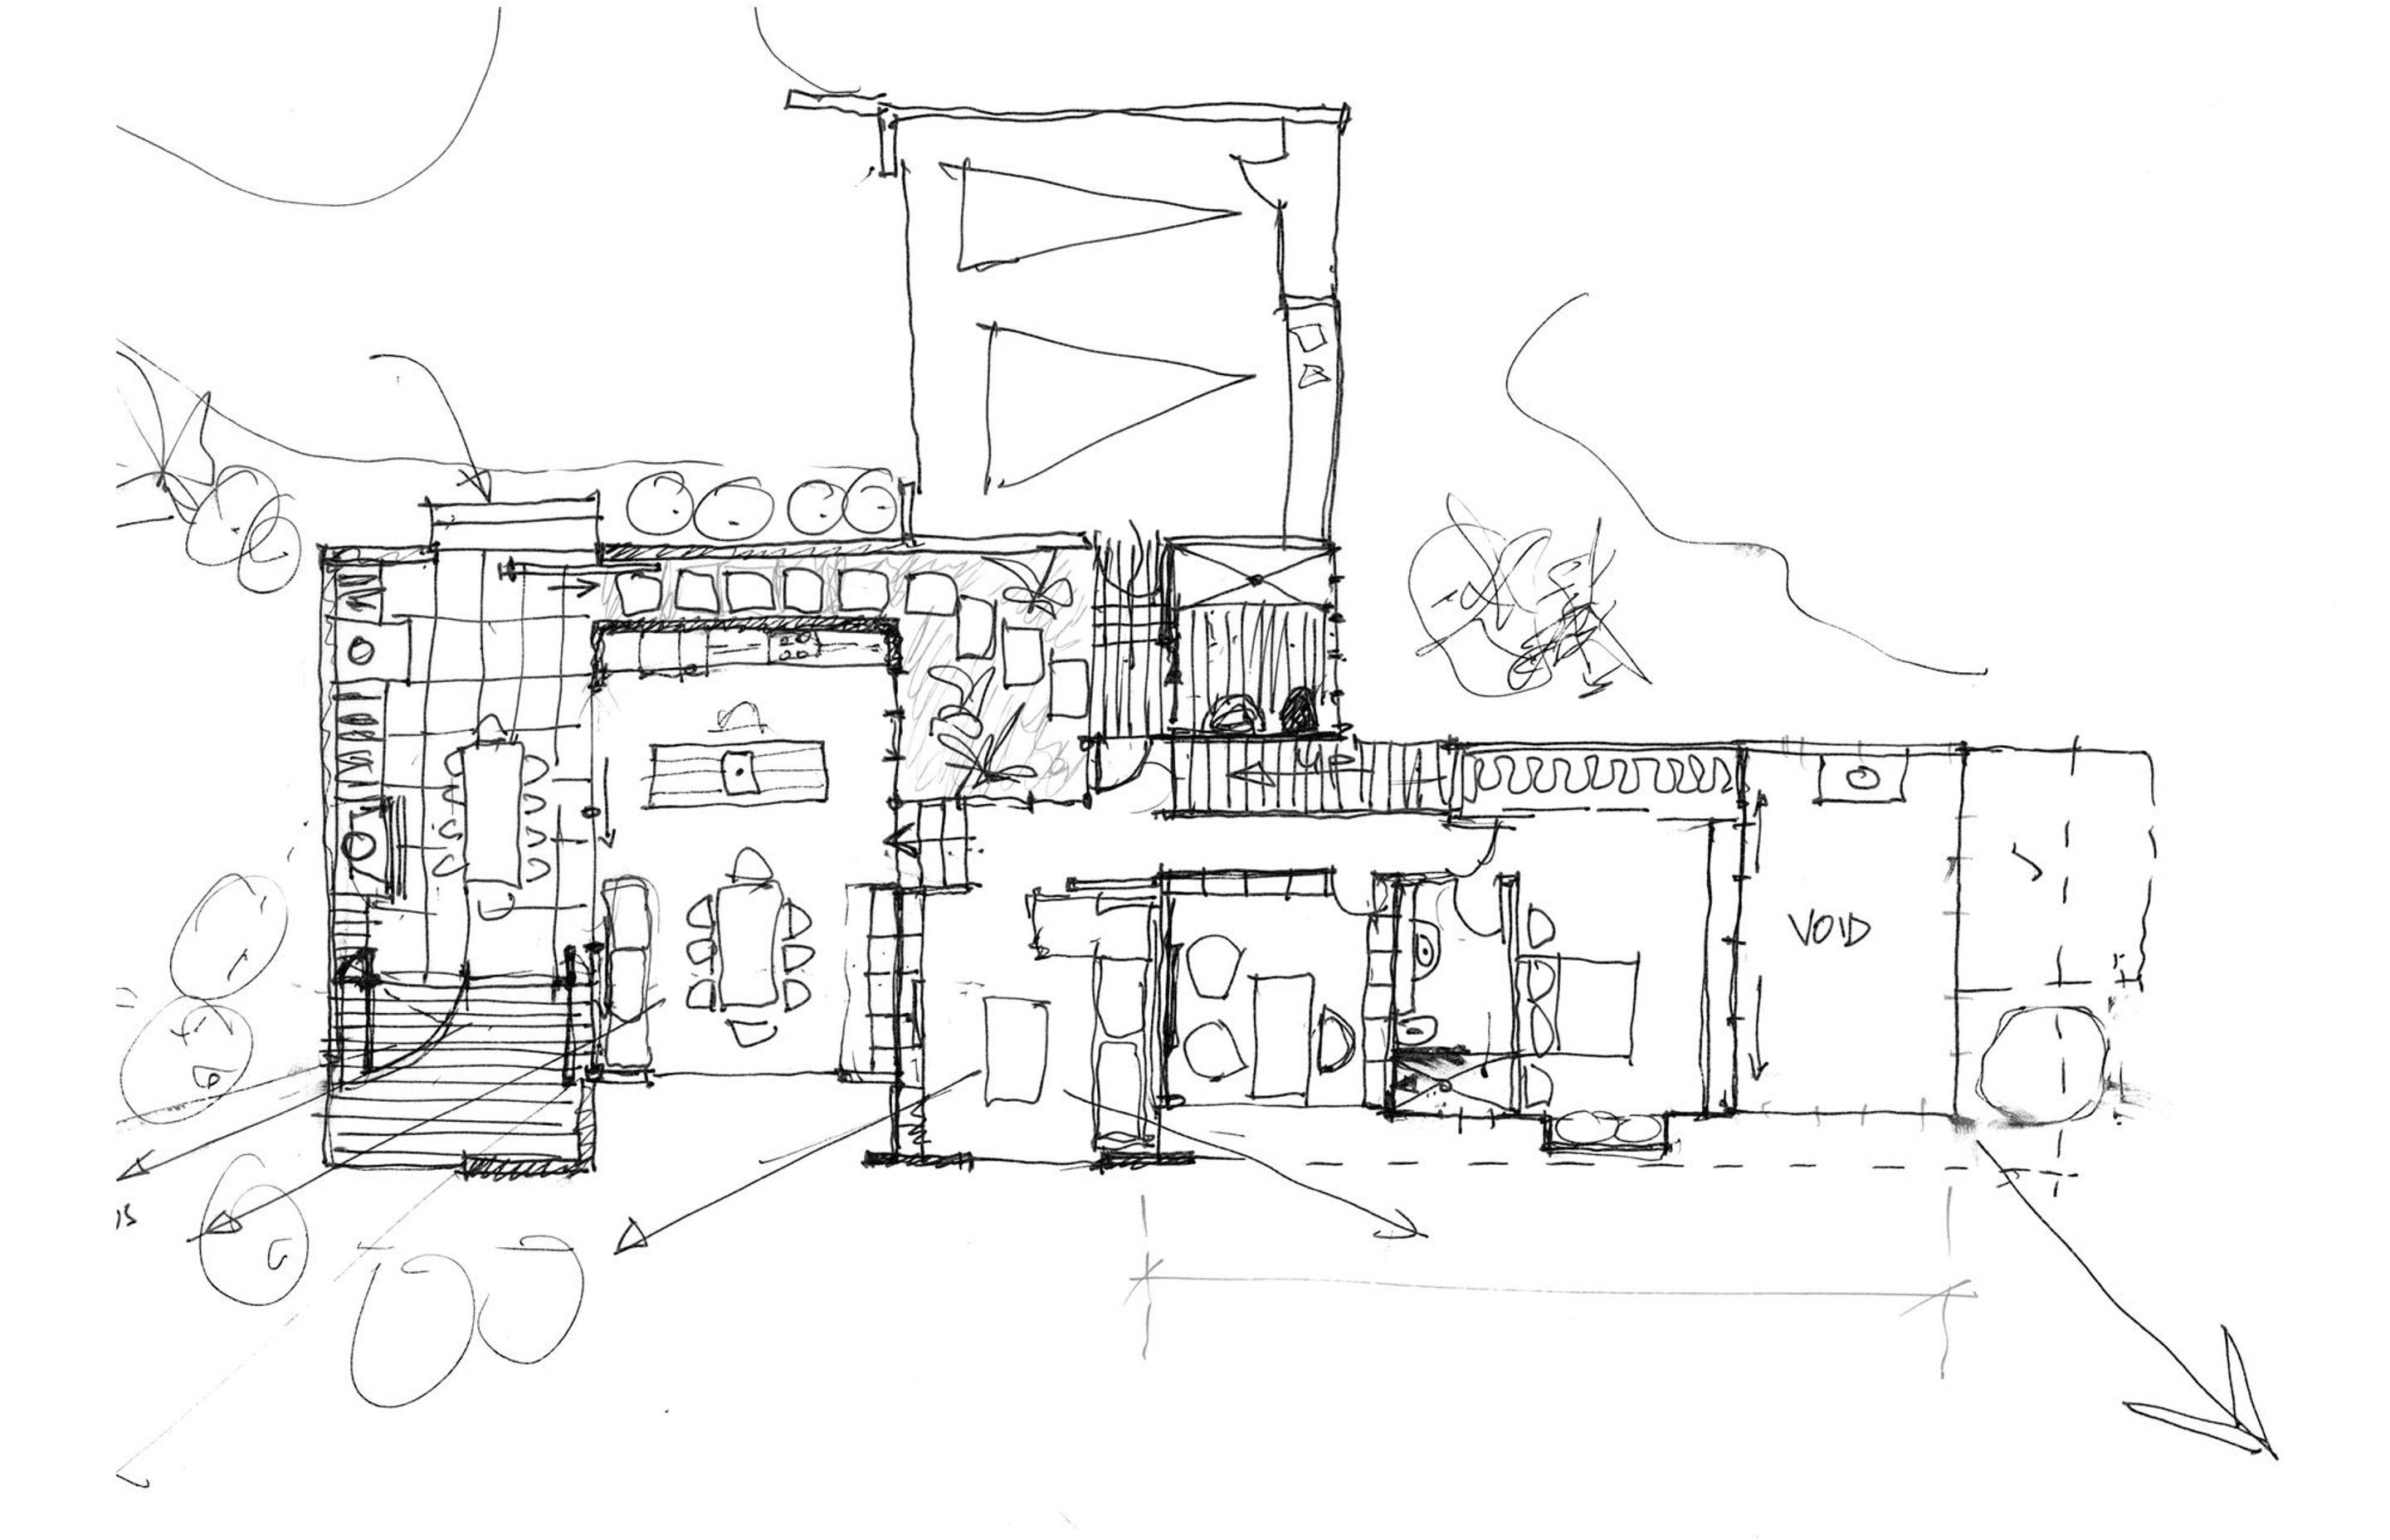 Early architect's sketch of the upper-level plan of Oneroa House, courtesy of SGA.